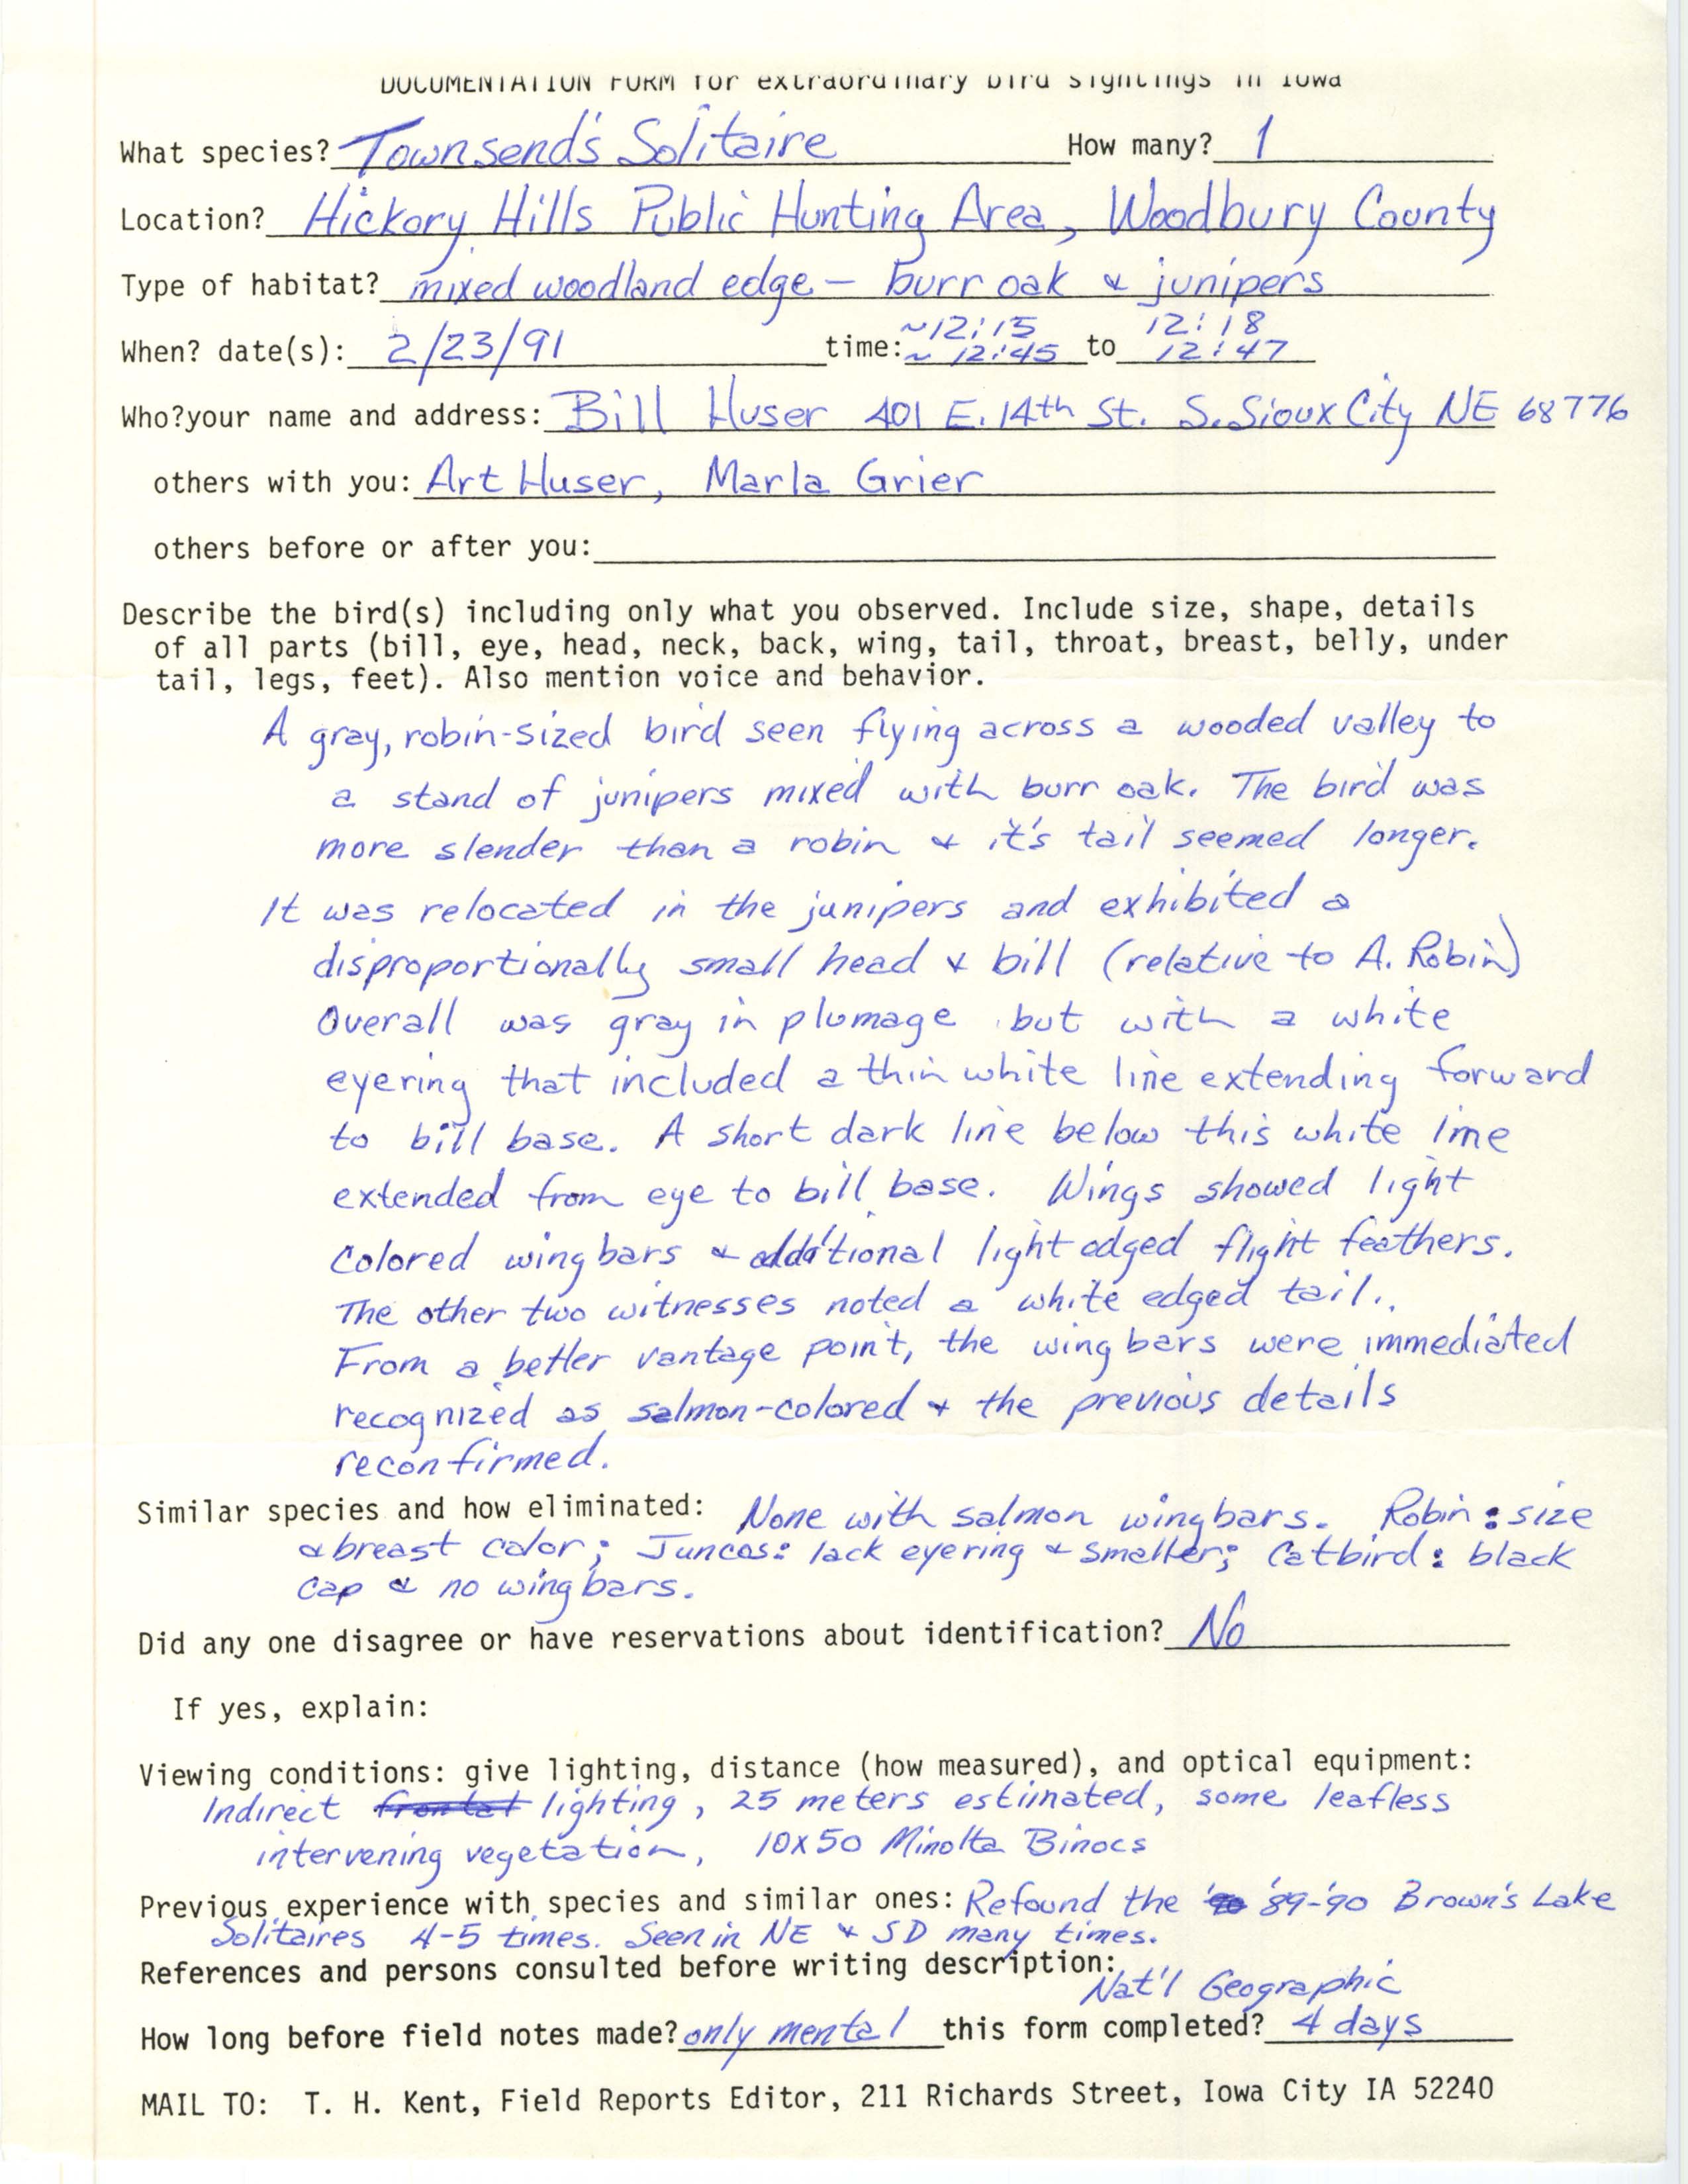 Rare bird documentation form for Townsend's Solitaire at Shagbark Hills, 1991